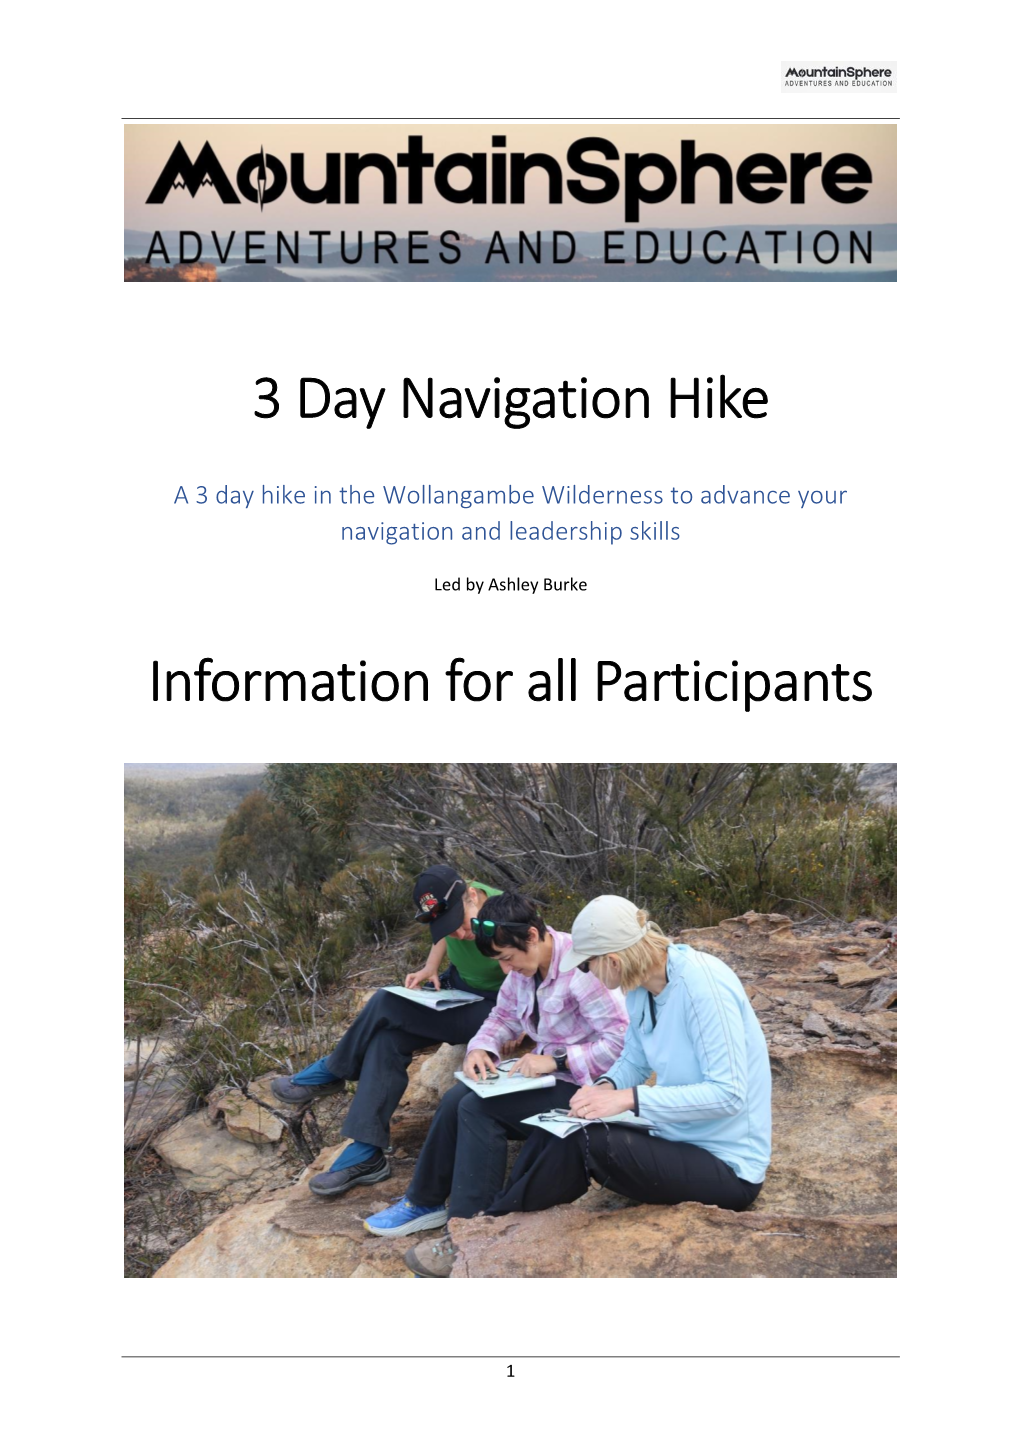 3 Day Navigation Hike Information for All Participants